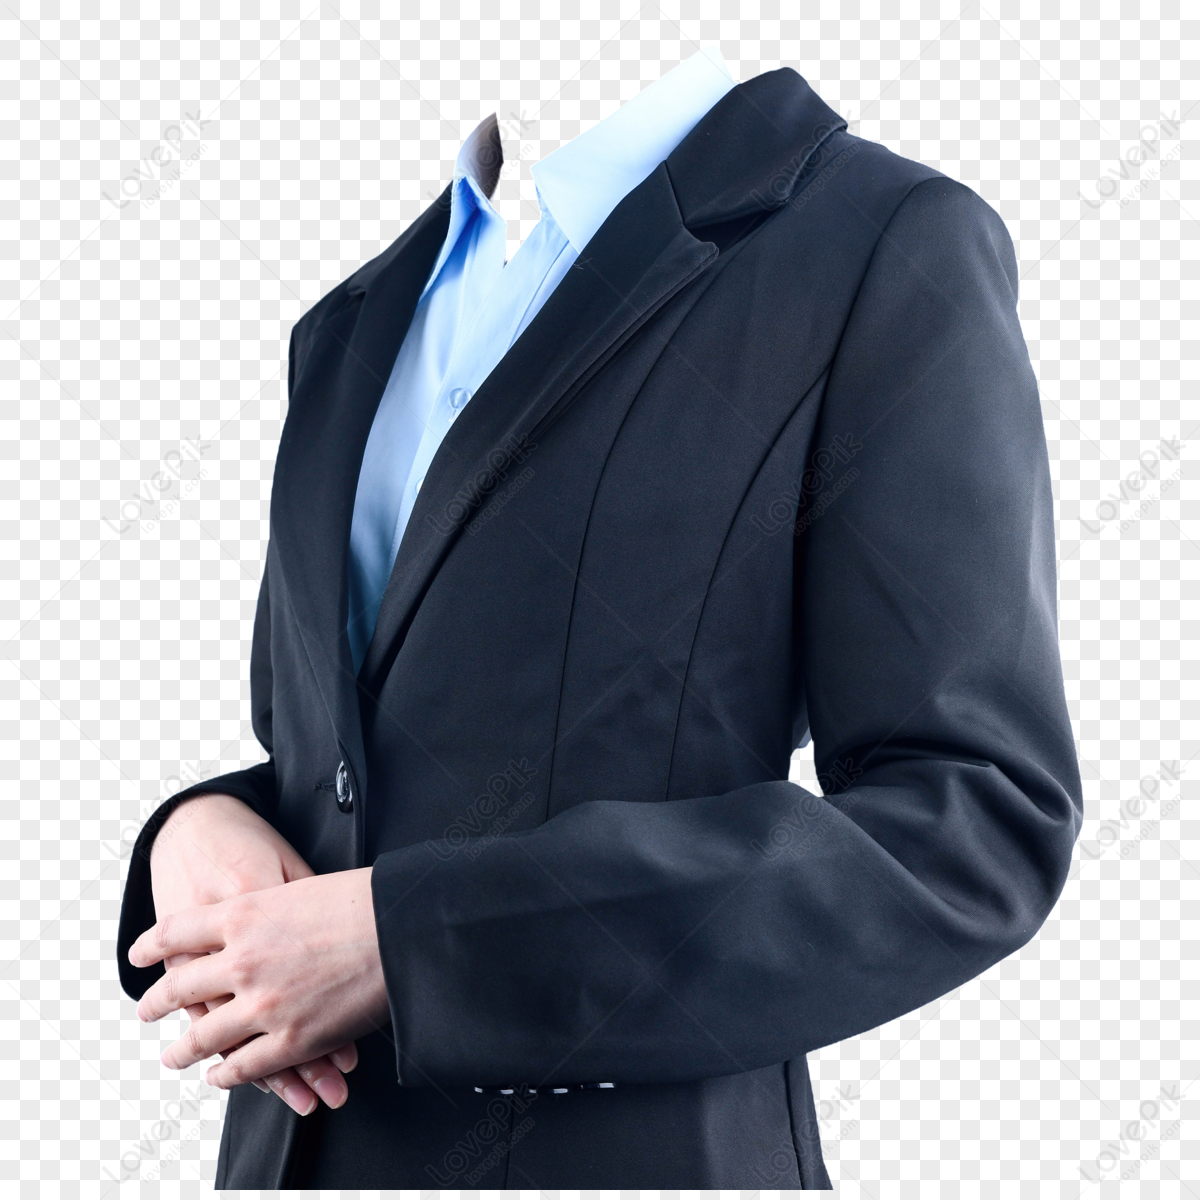 Women In Suit Images, HD Pictures For Free Vectors Download - Lovepik.com